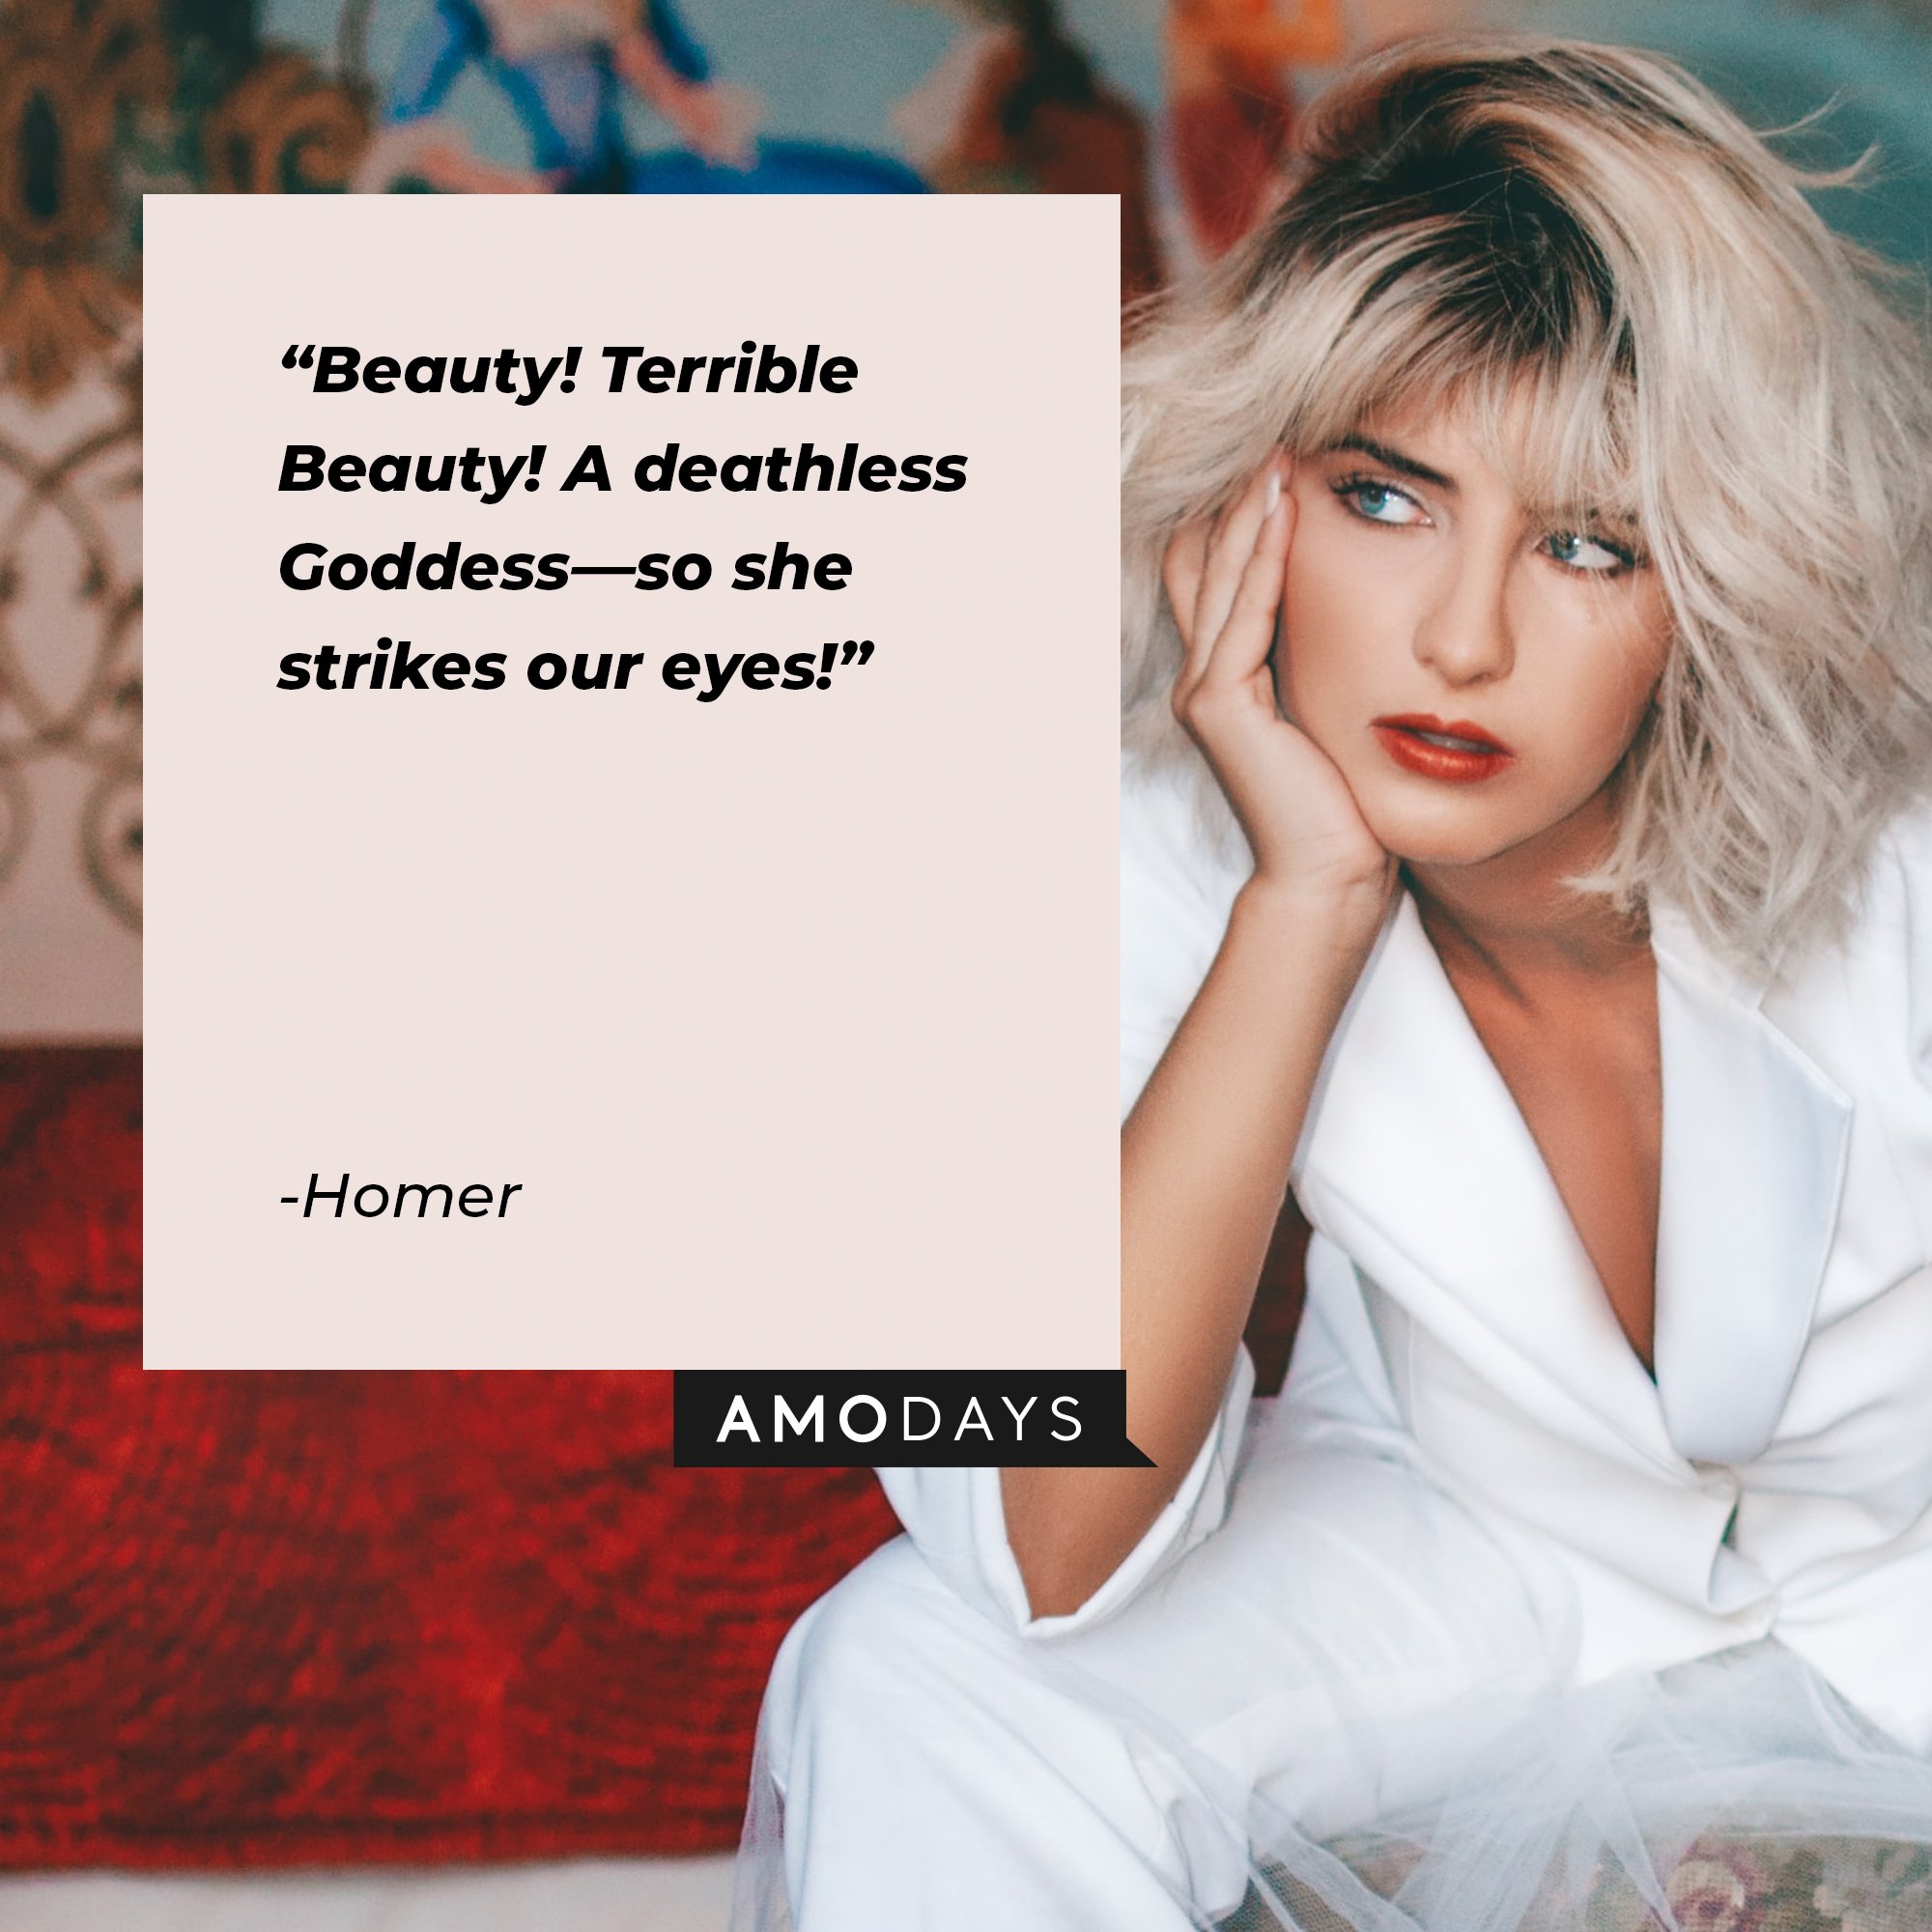 Homer’s quote: "Beauty! Terrible Beauty! A deathless Goddess—so she strikes our eyes!" | Image: AmoDays